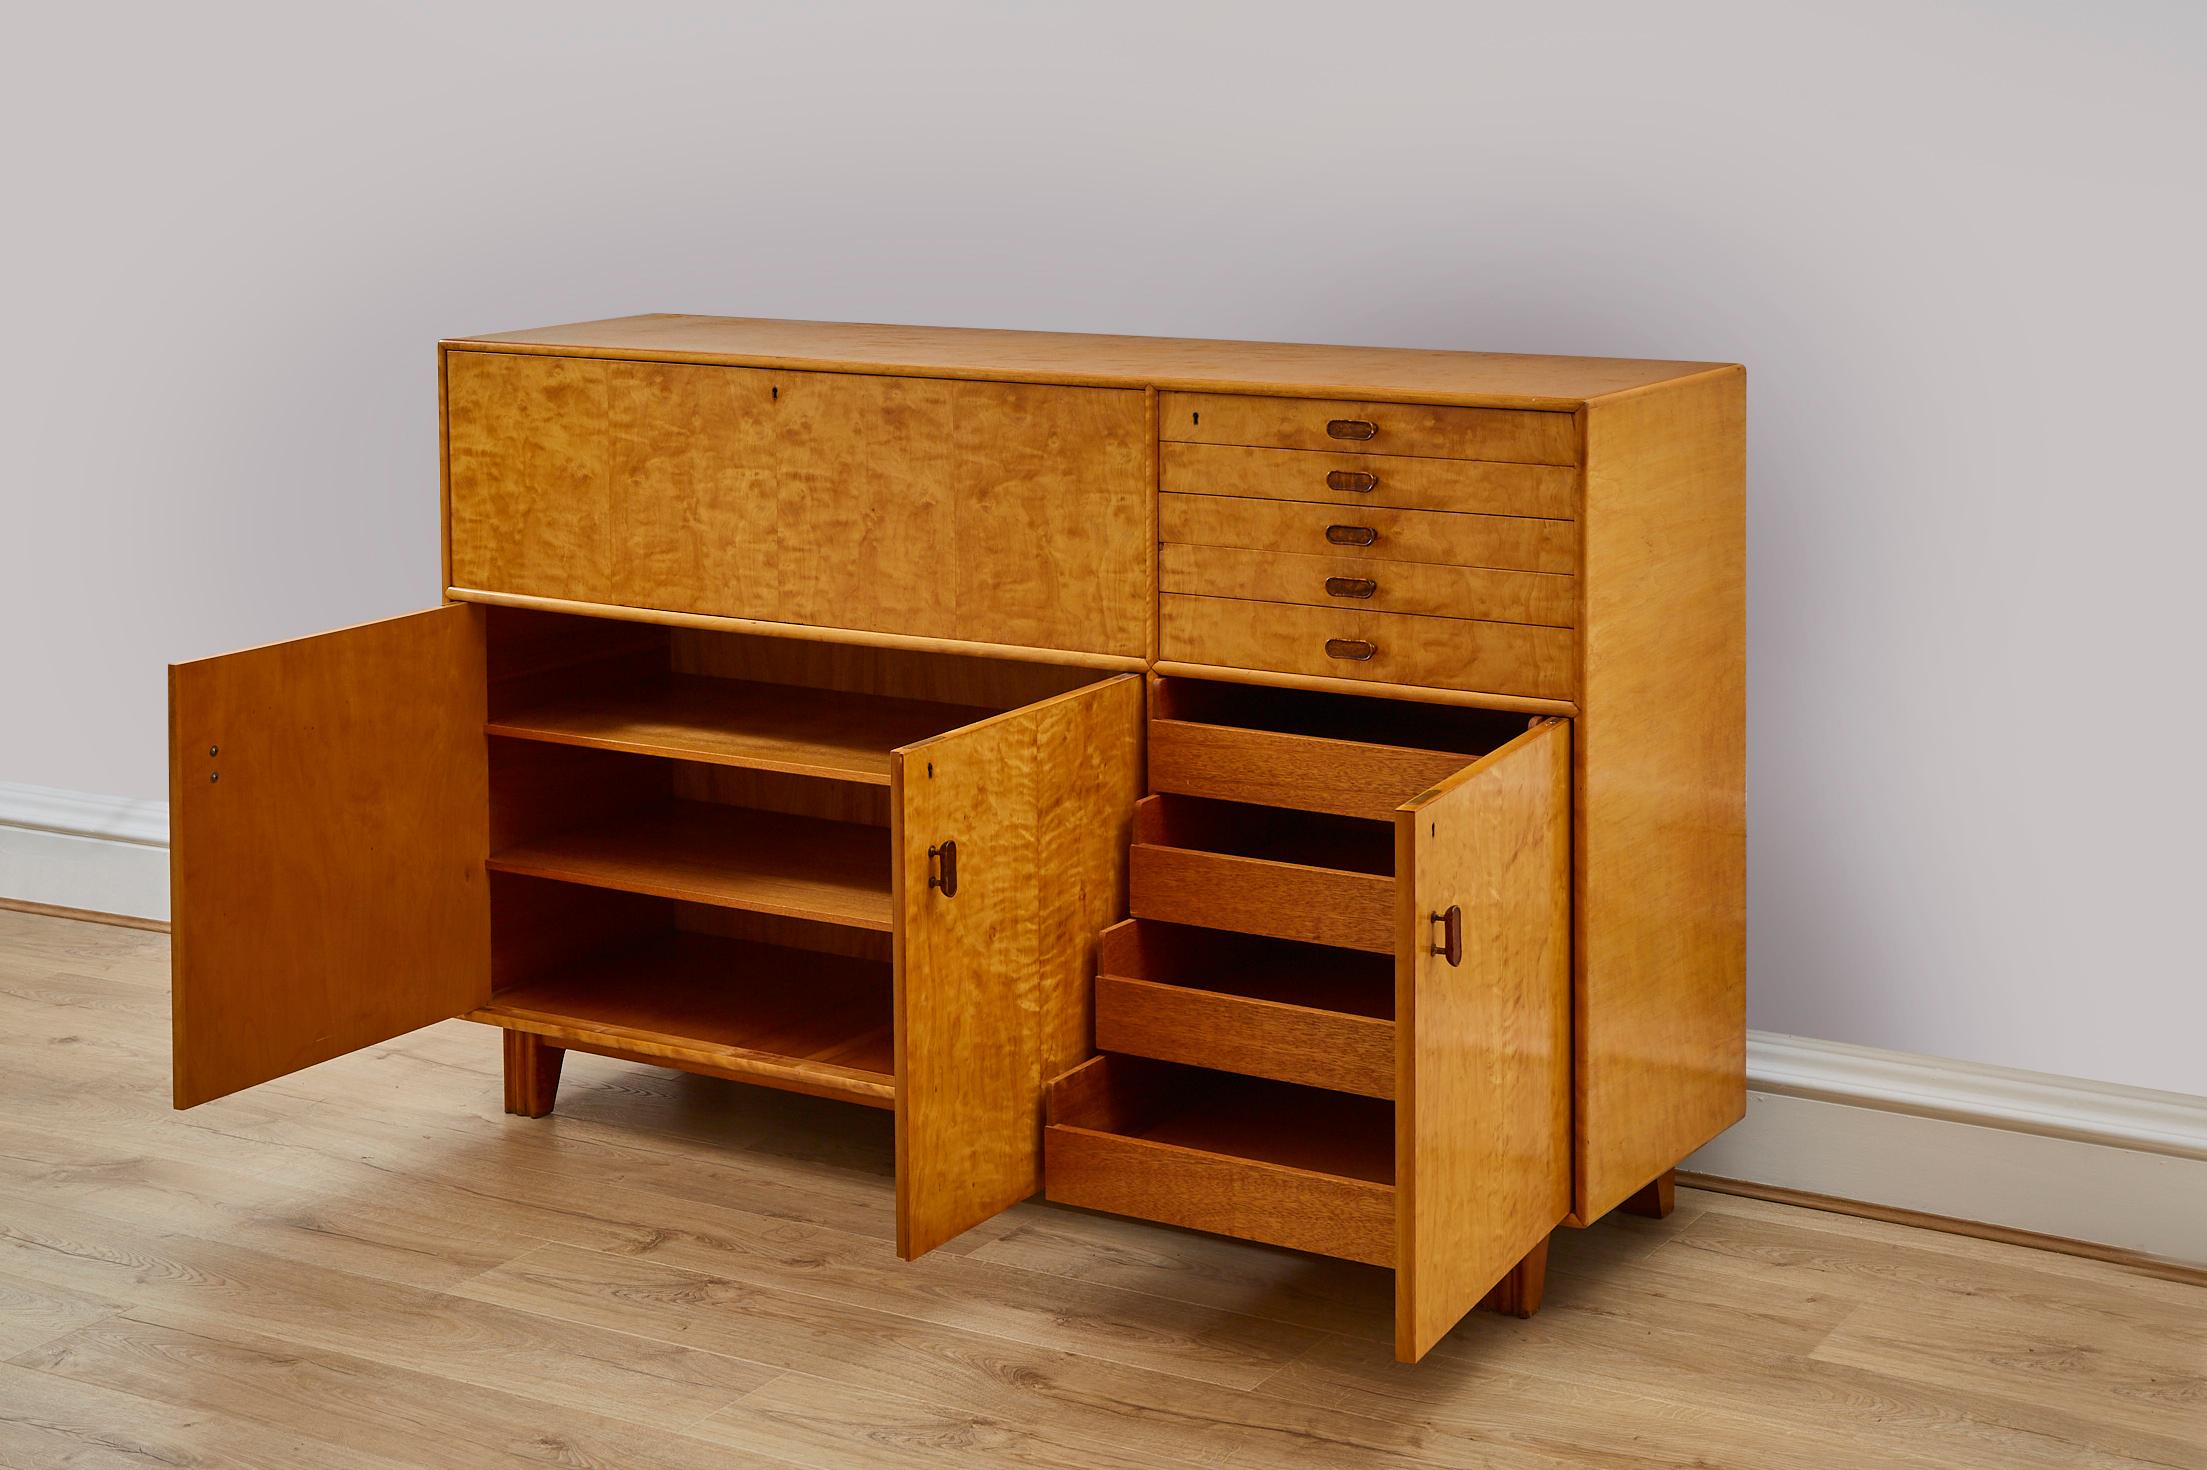 20th Century Axel Larsson Bodafors Art Deco Birch Wood Cabinet / Sideboard, 1930's For Sale